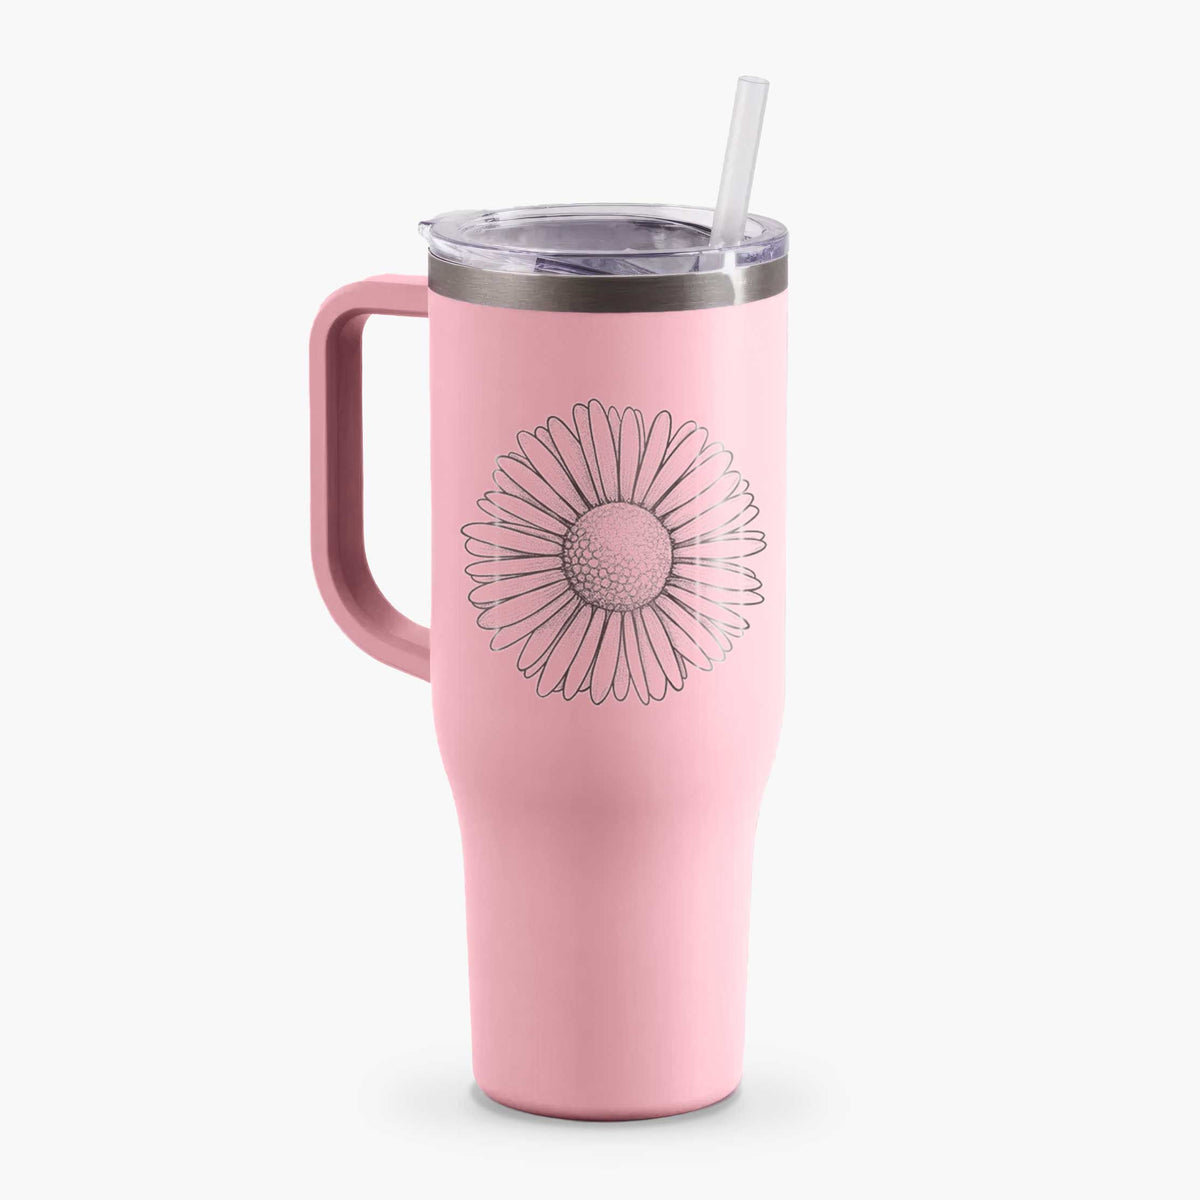 Bellis perennis - The Common Daisy - 40oz Tumbler with Handle